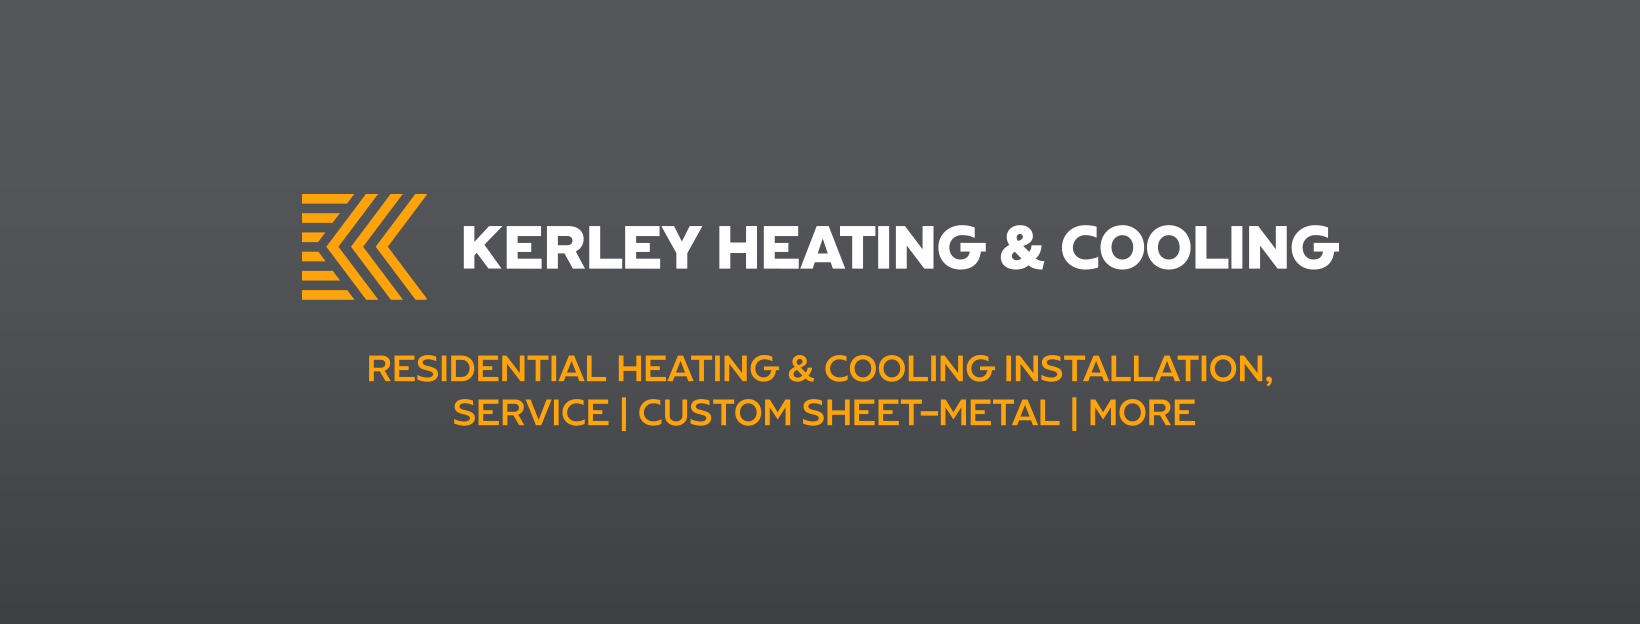 A gray and yellow logo for a heating company.